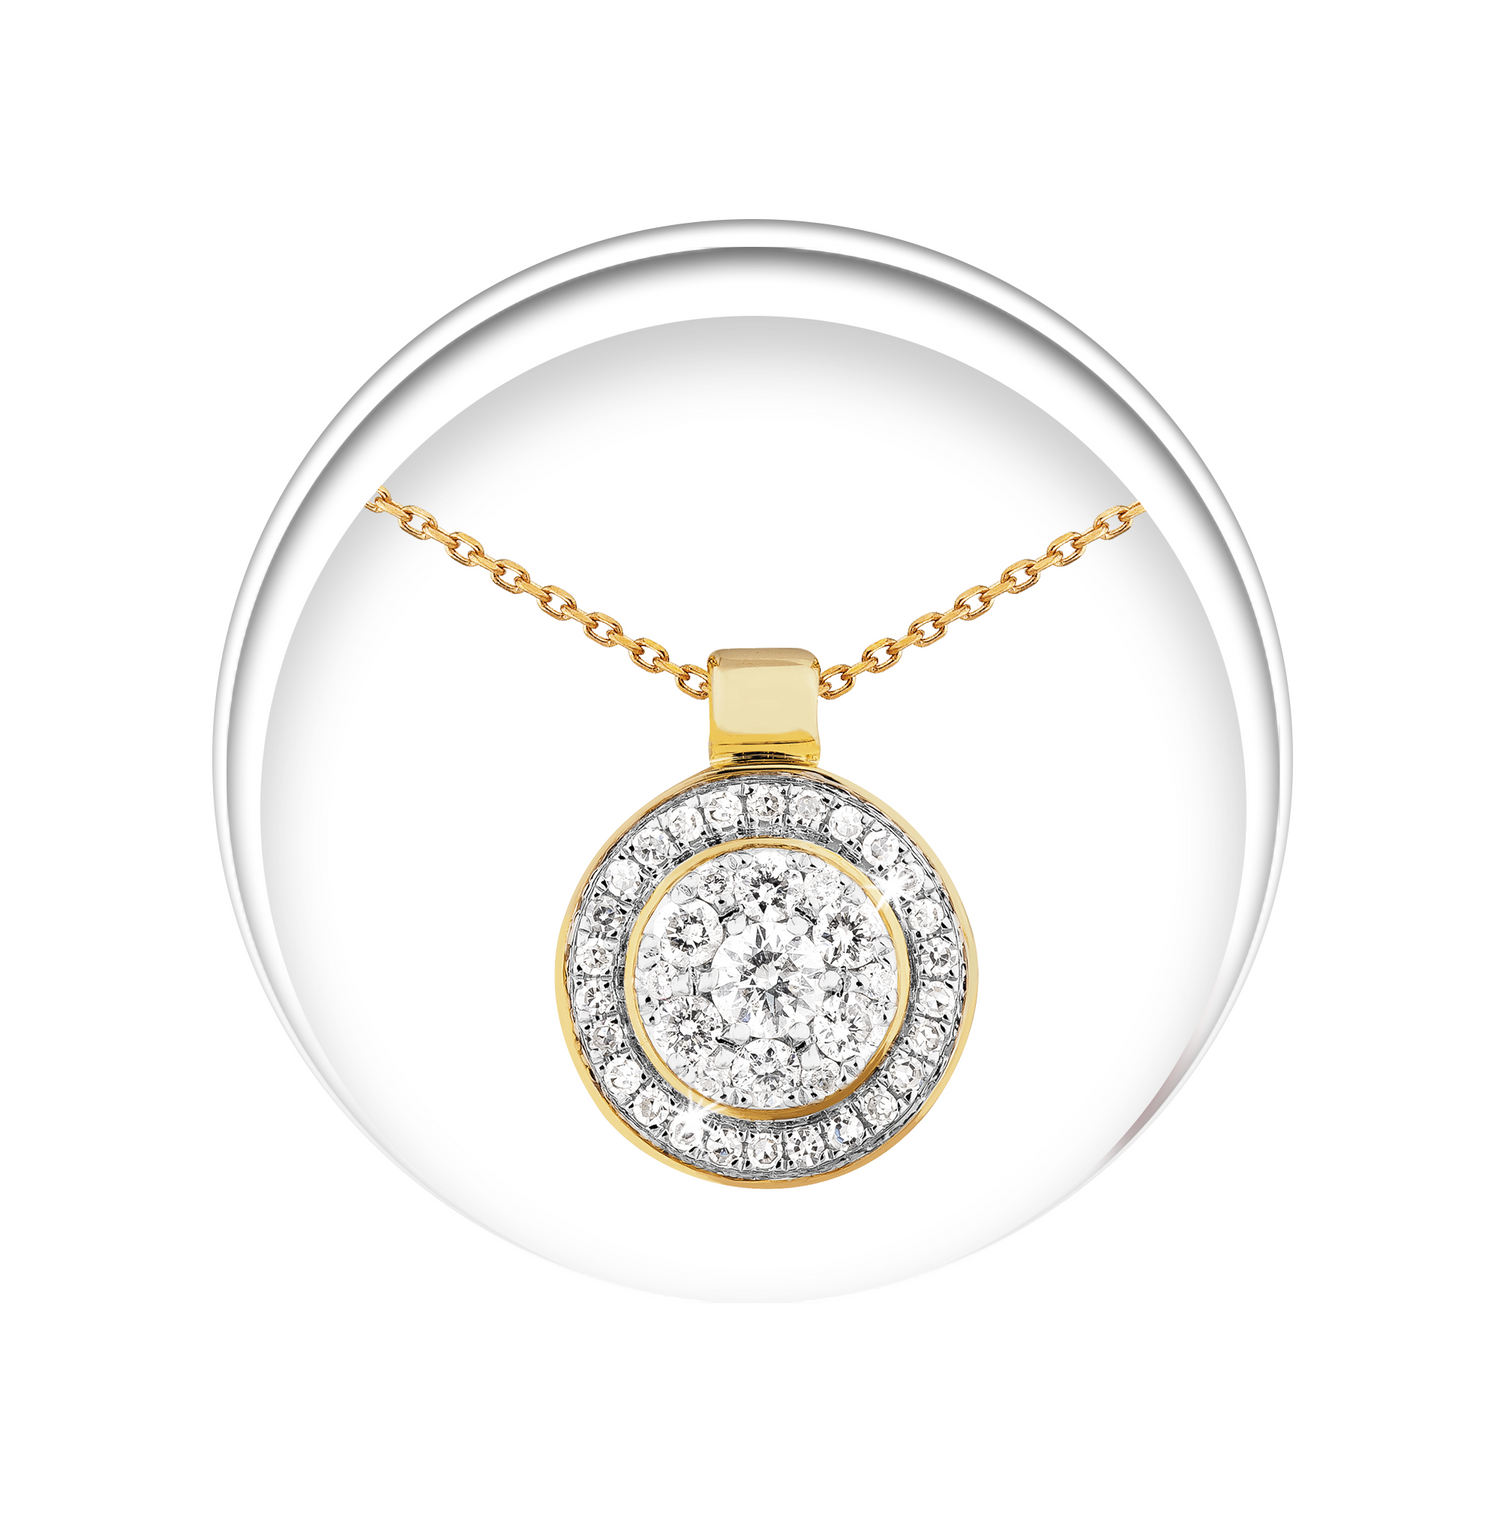 Indulge in timeless elegance with our collection of yellow gold pendants and chains for ladies. From delicate chains to intricate designs, find the perfect piece to add a touch of sophistication to any outfit. Shop now.